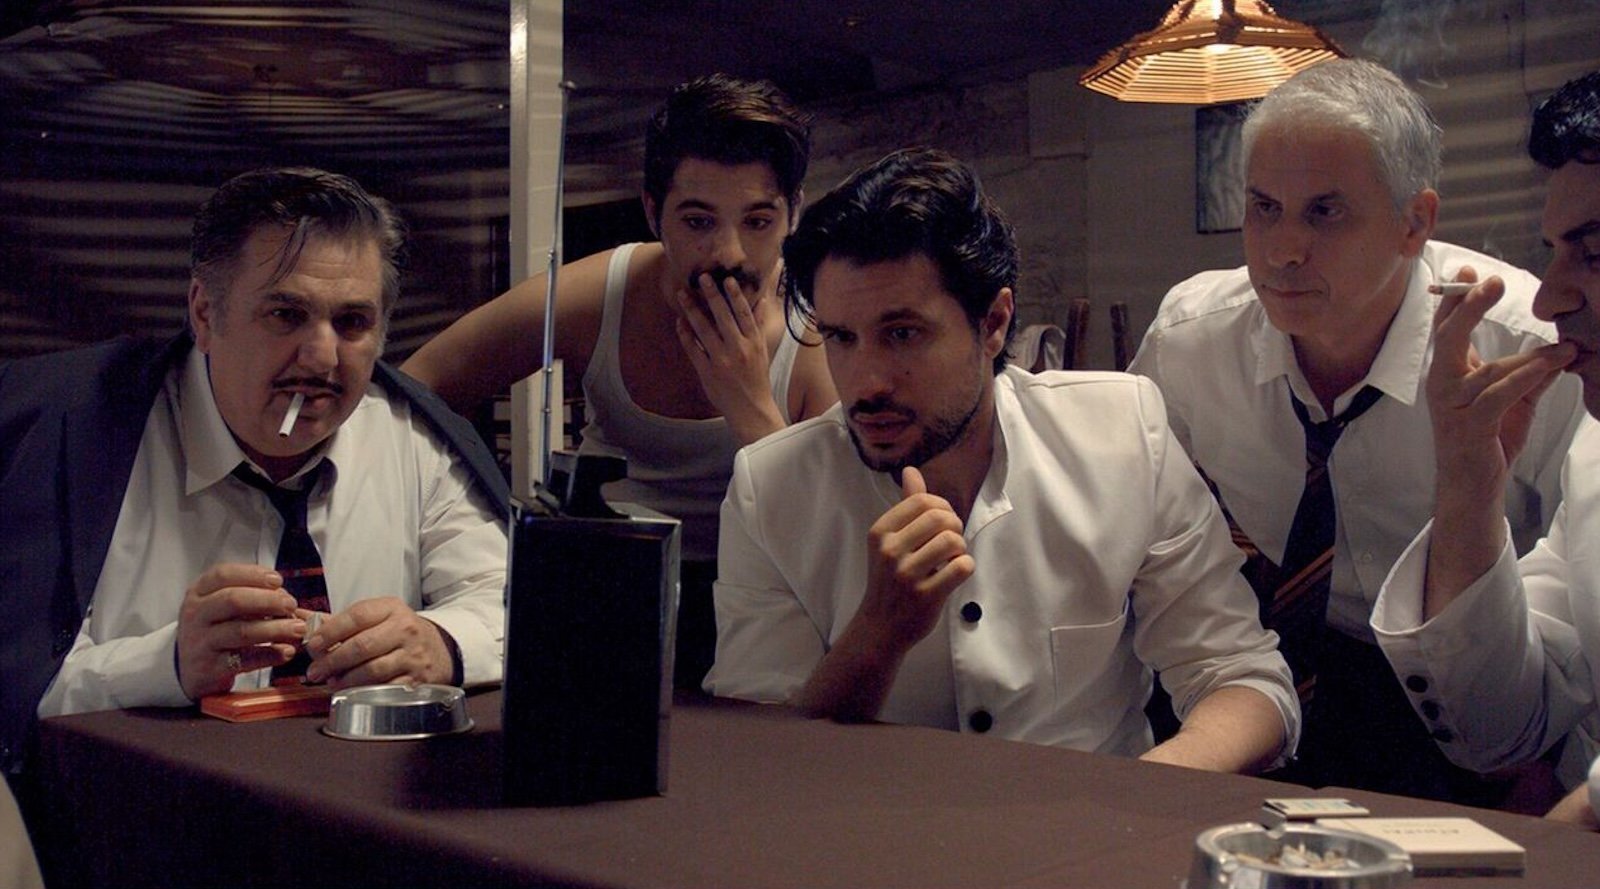 A group of five men wearing white shirts look concerned as they gather around a table and listen to a transistor radio perched on the table in front of them.